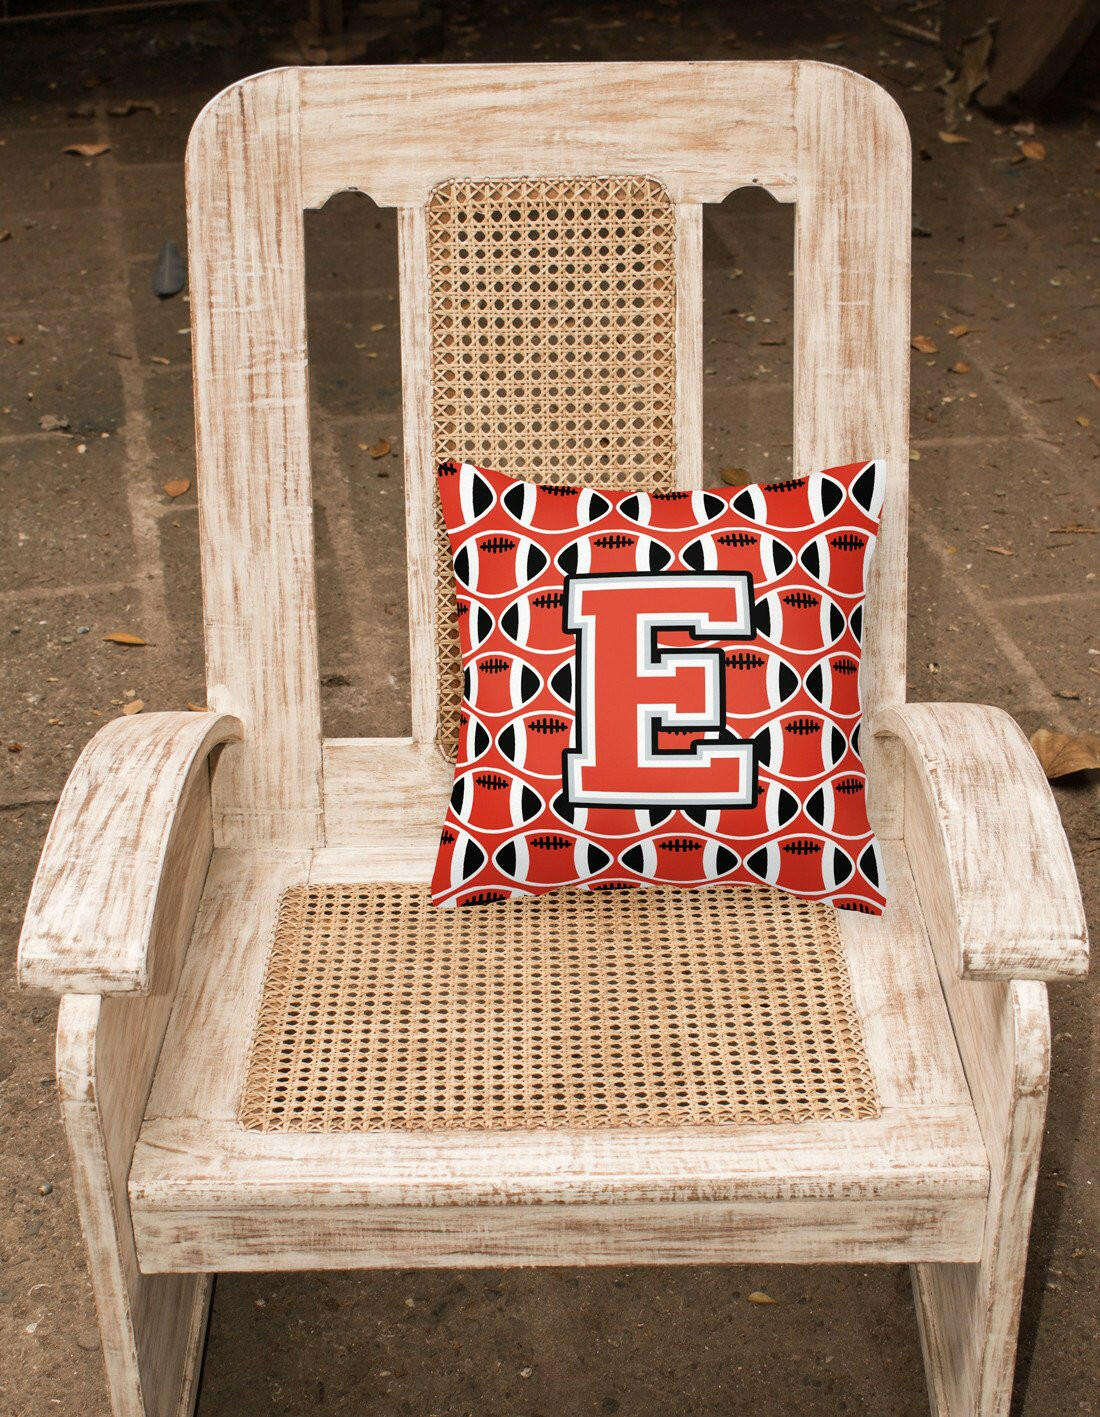 Letter E Football Scarlet and Grey Fabric Decorative Pillow CJ1067-EPW1414 by Caroline's Treasures